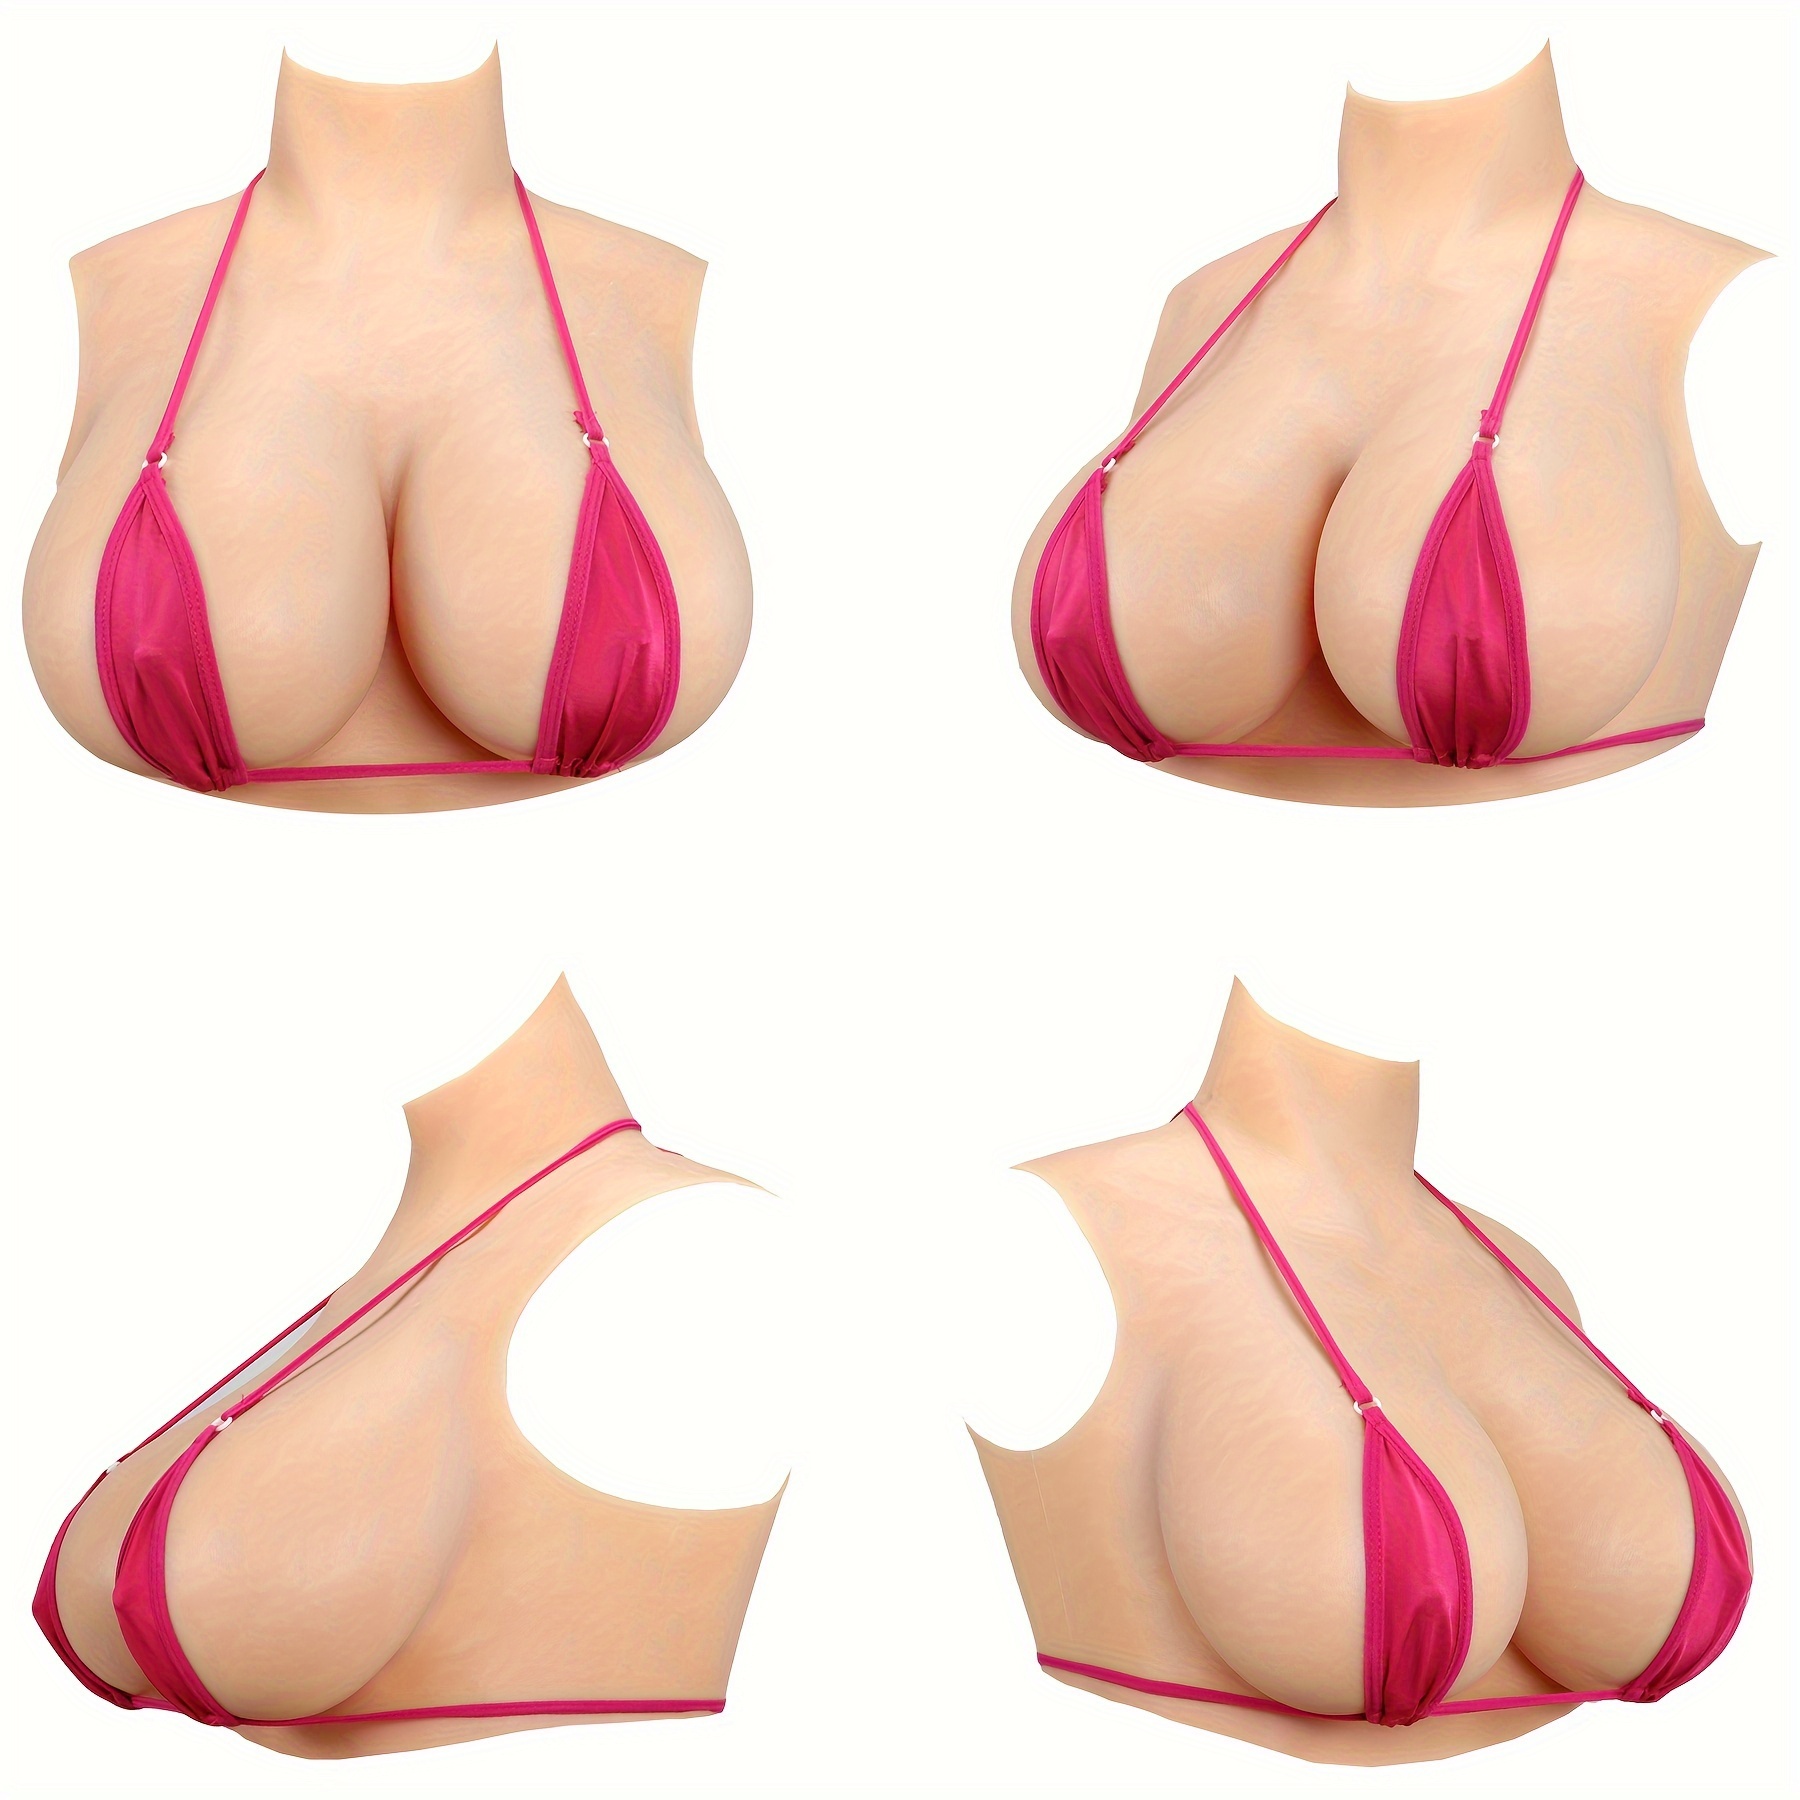 A - EE Cup 2-in-1 Fake Breasts, Mastectomy Crossdresser Transgender Cosplay  Bras Prosthetic Set Silicone Fake Breast Forms with Pocket Bra (Size 